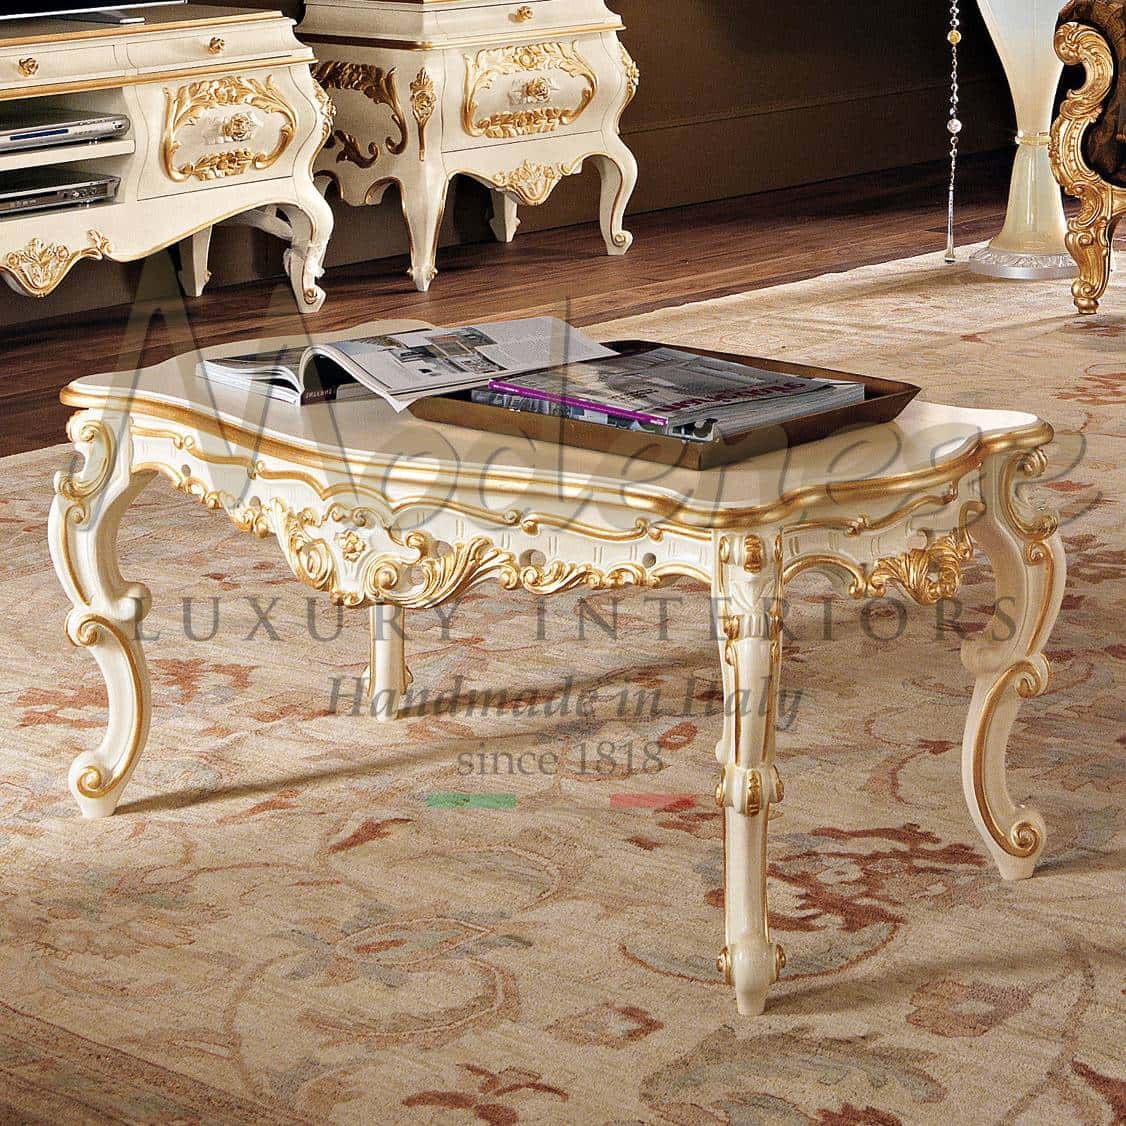 Classic Made In Italy Luxury Wooden Coffee Tables And Side Tables Luxury Italian Furnishing Luxury Classic Furniture Made In Italy